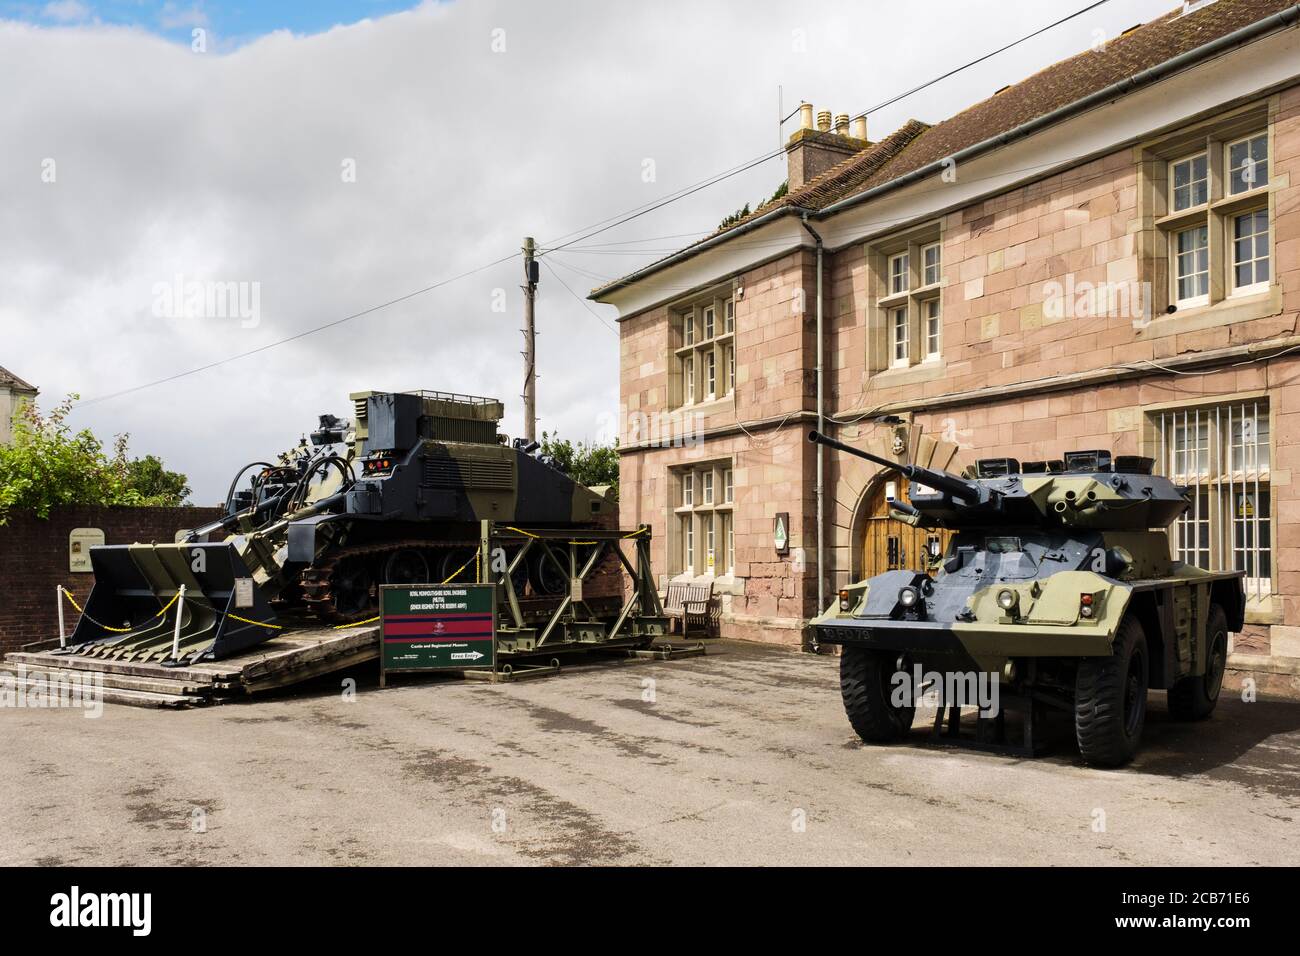 Armoured vehicles on display outside Great Castle House Royal Monmouthshire Royal Engineers regimental Museum. Monmouth Monmouthshire  Wales UK Stock Photo